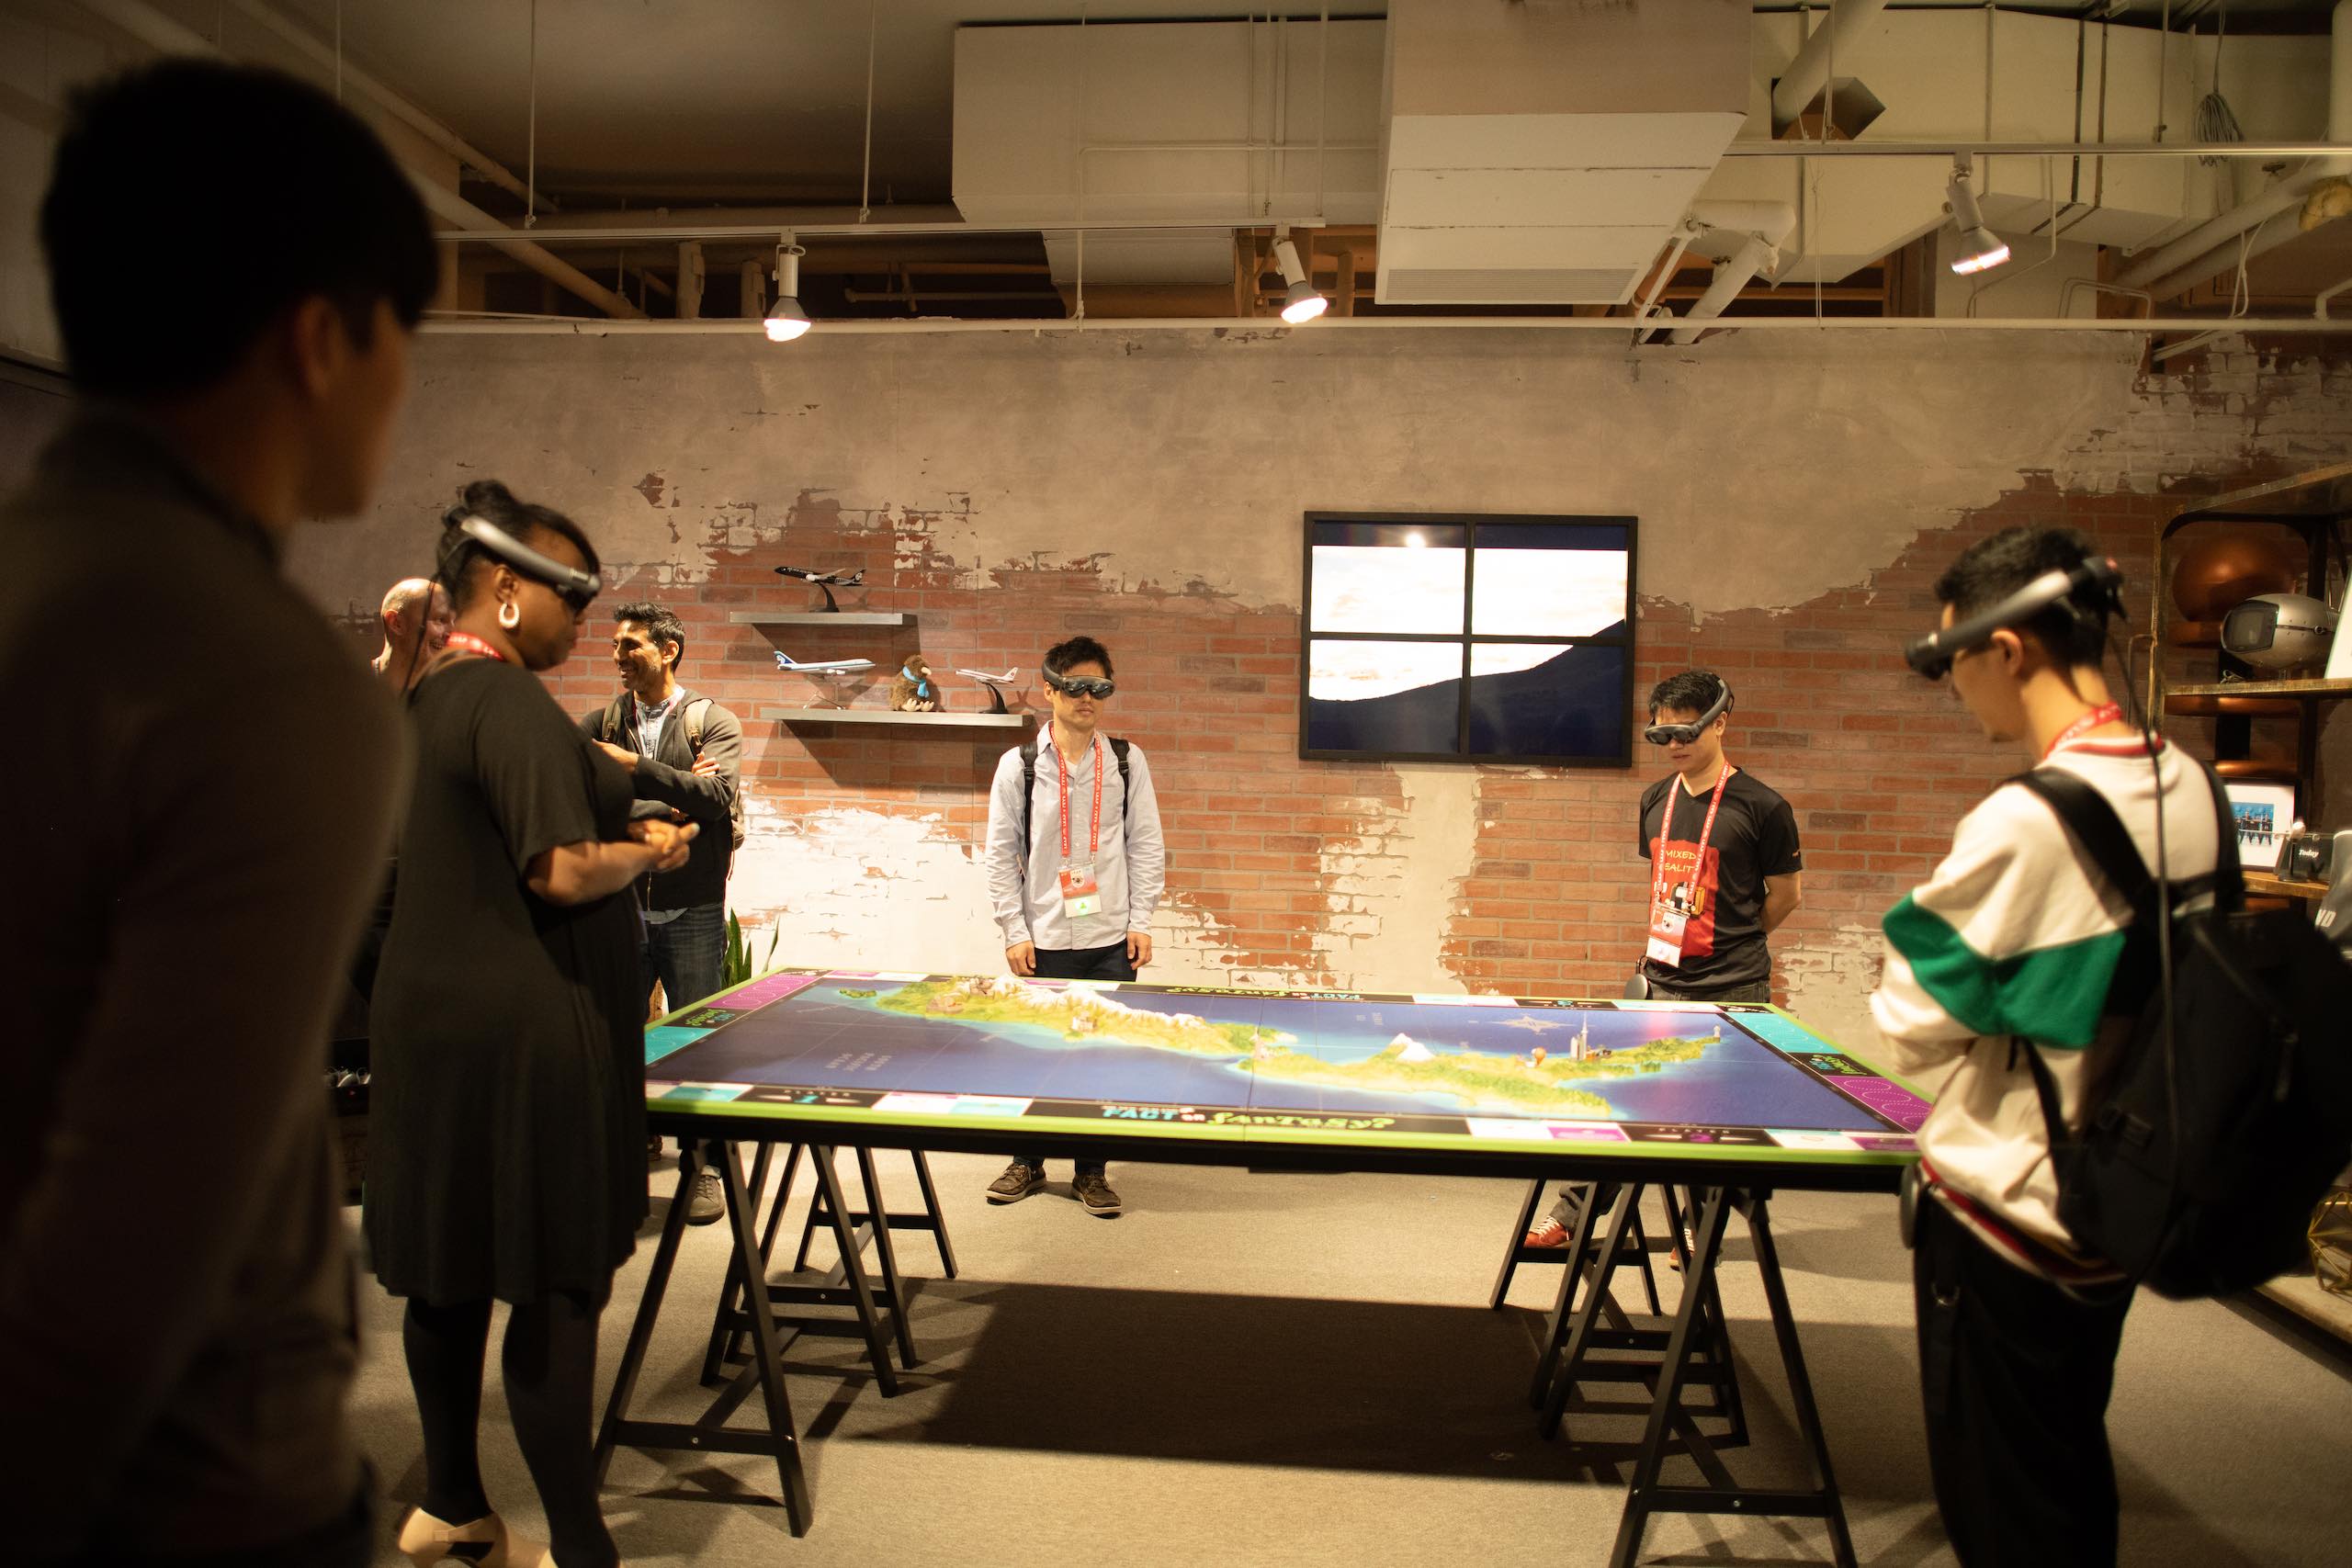 People wearing Lightwear equipment standing around a table with a map on it